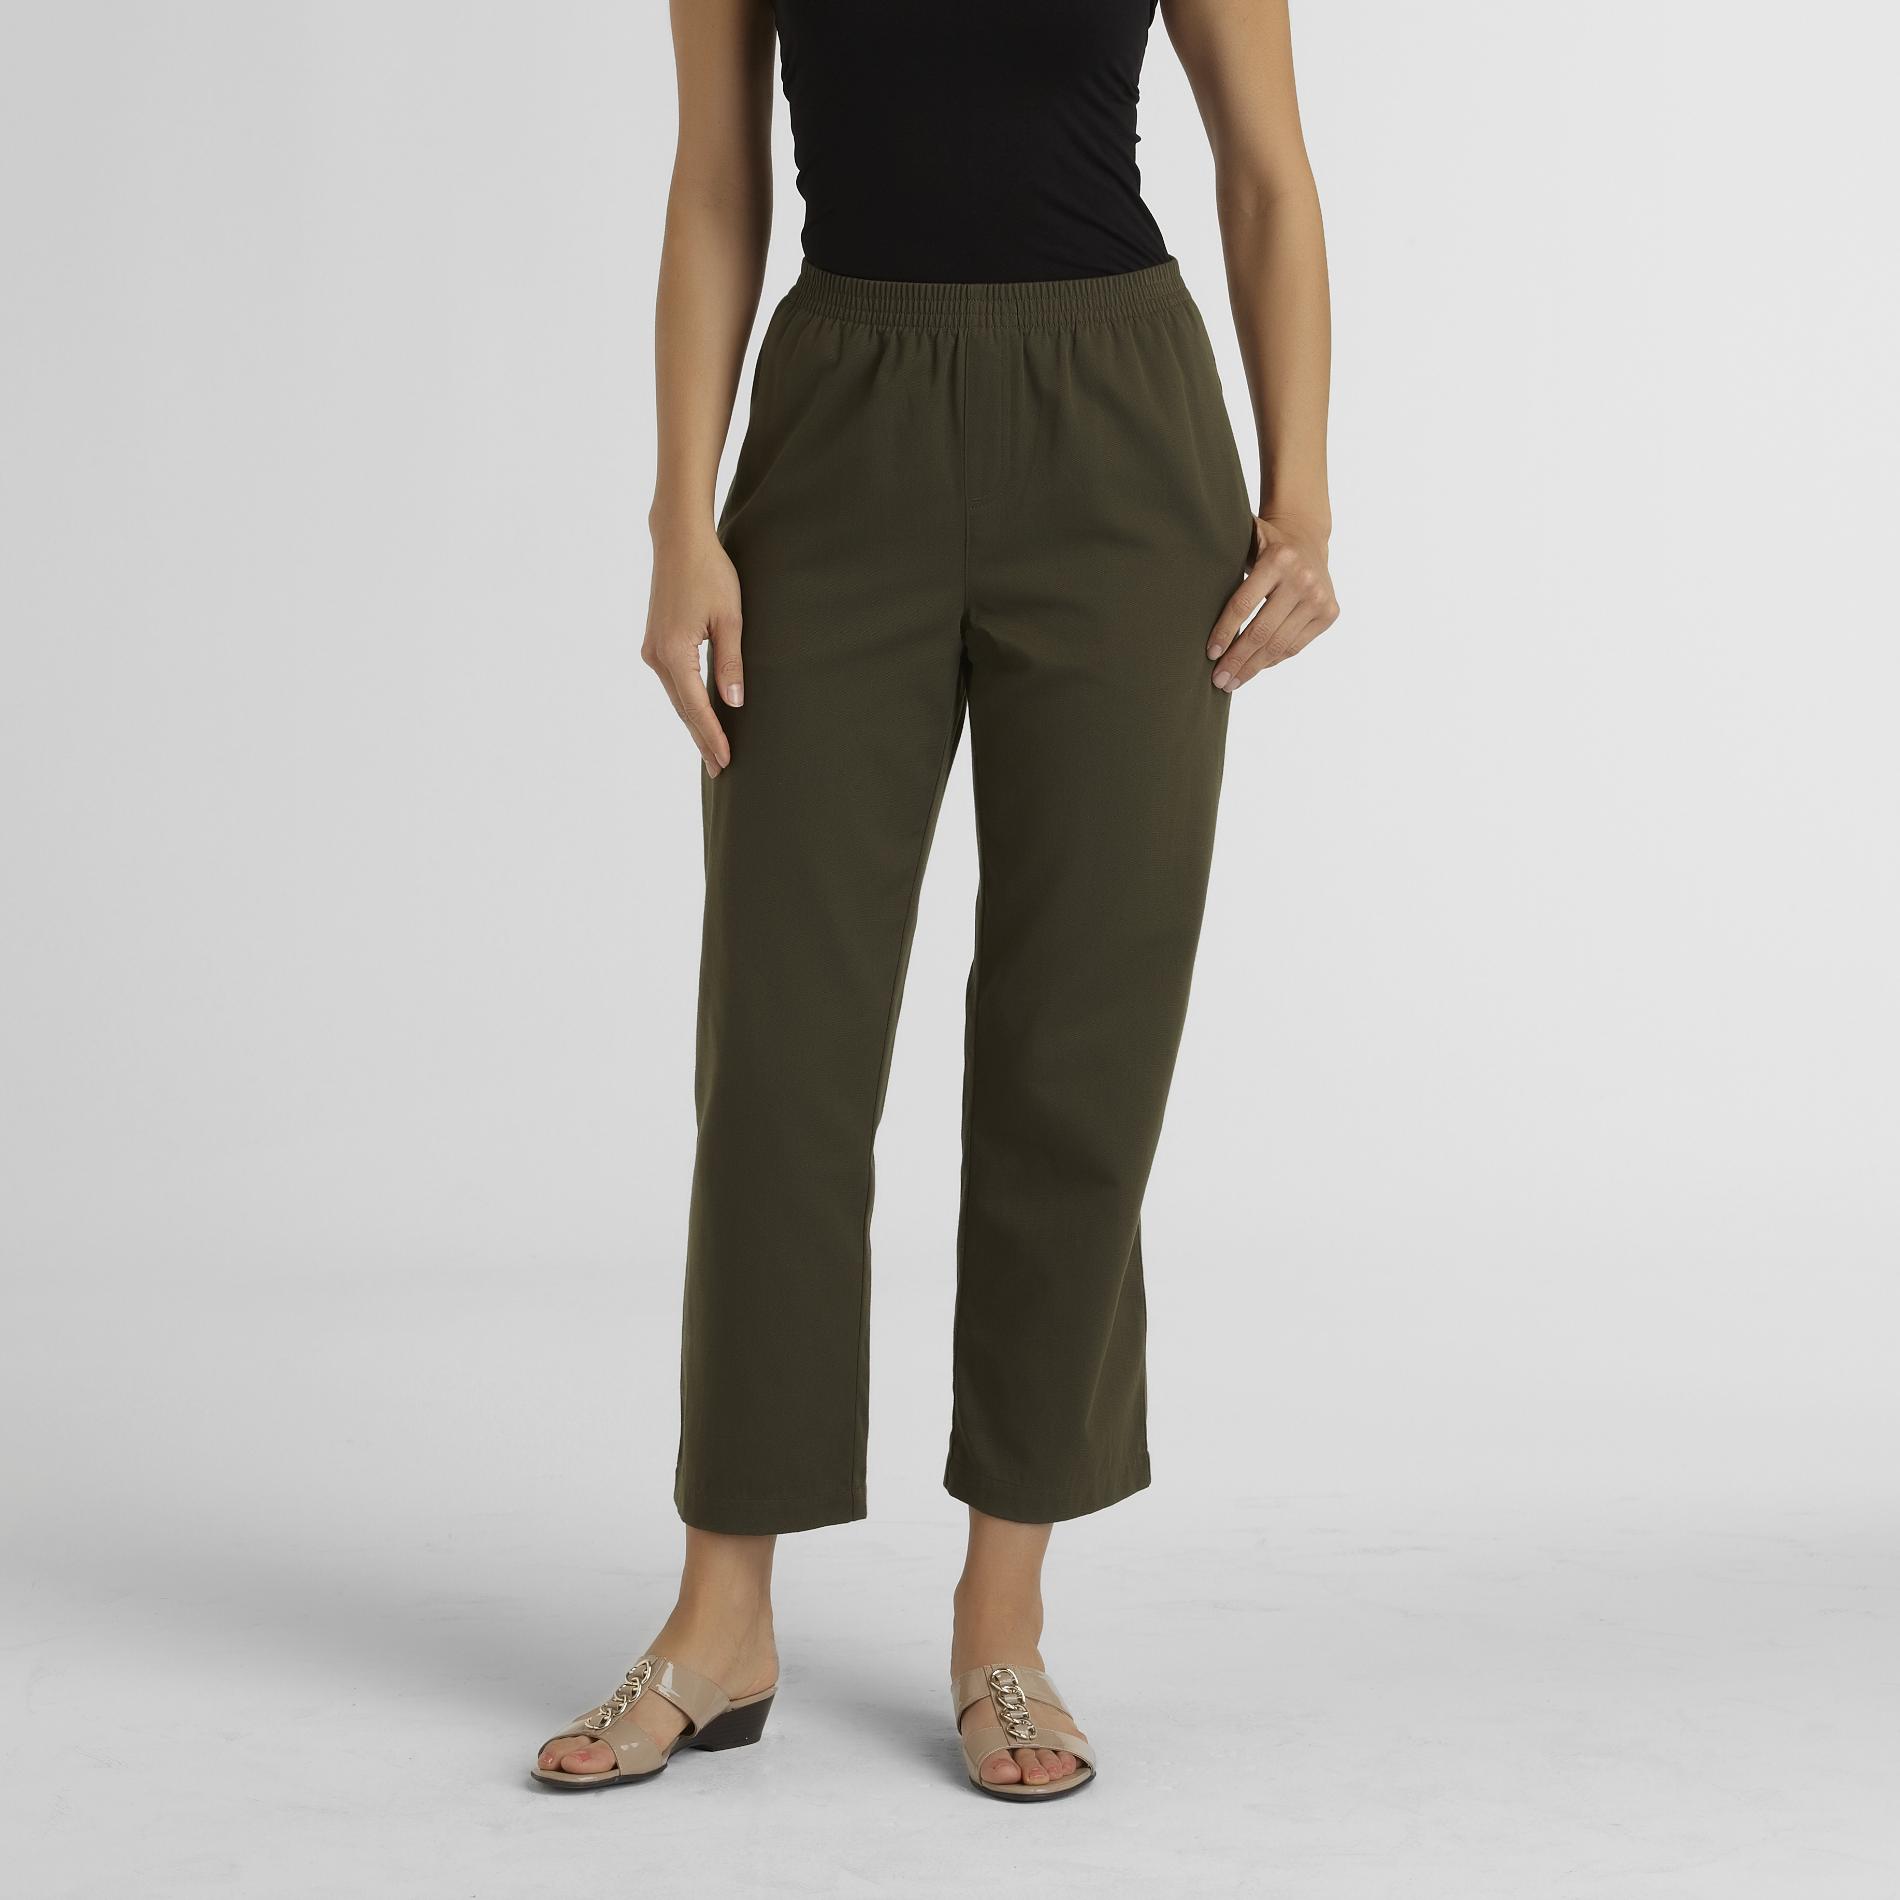 Basic Editions Women's Twill Pants - Relaxed Fit